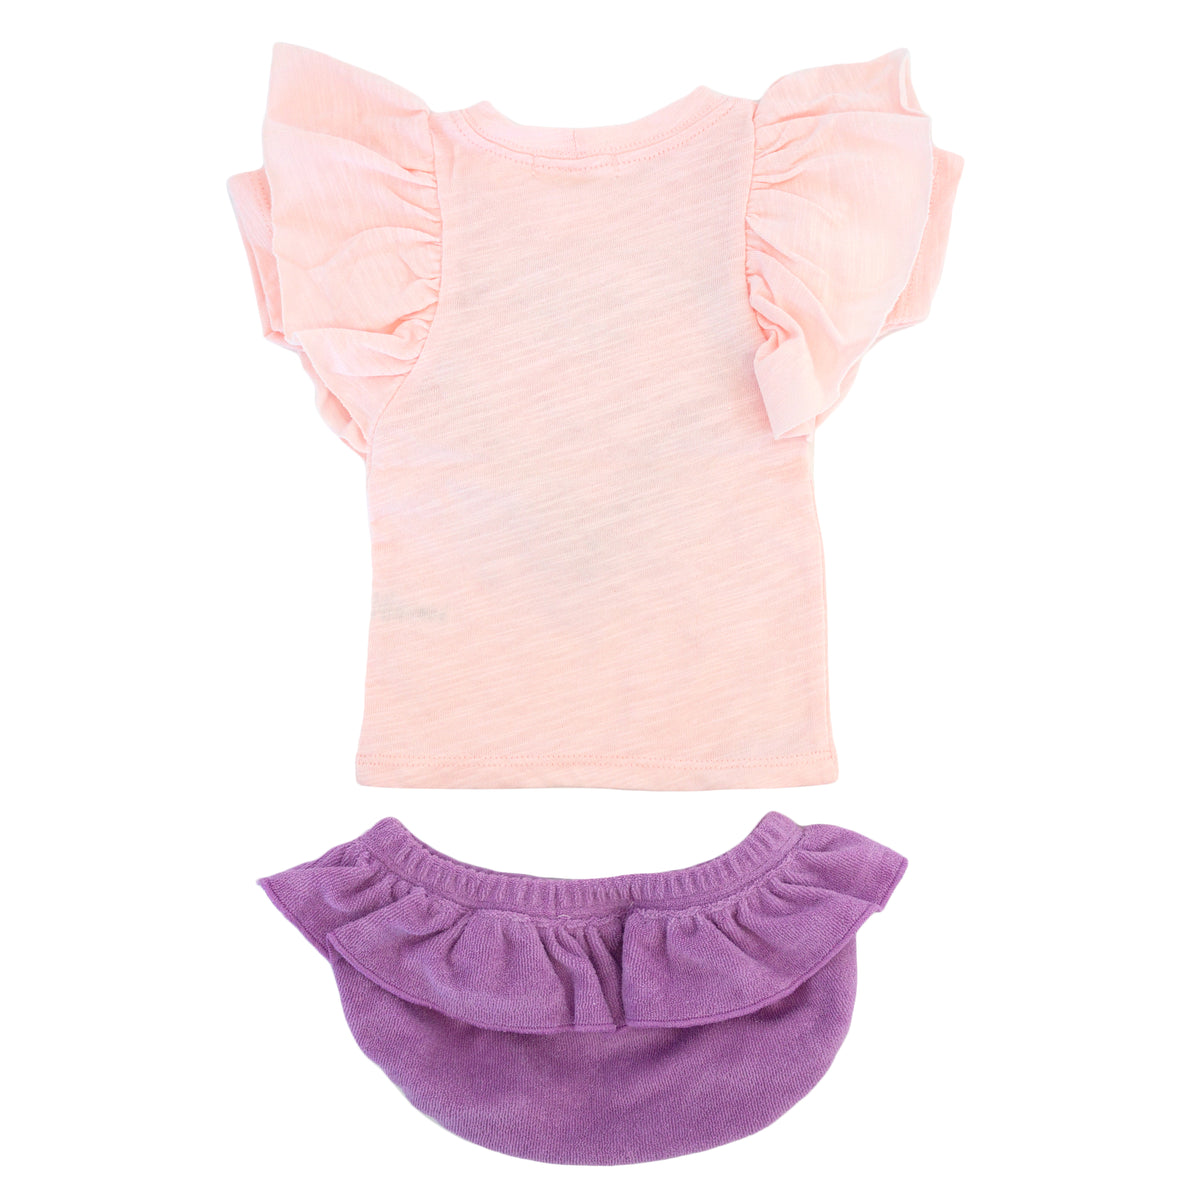 oh baby! Butterfly Short Sleeve Tee with Terry Tushie - Ruffle Heart Applique - Orchid